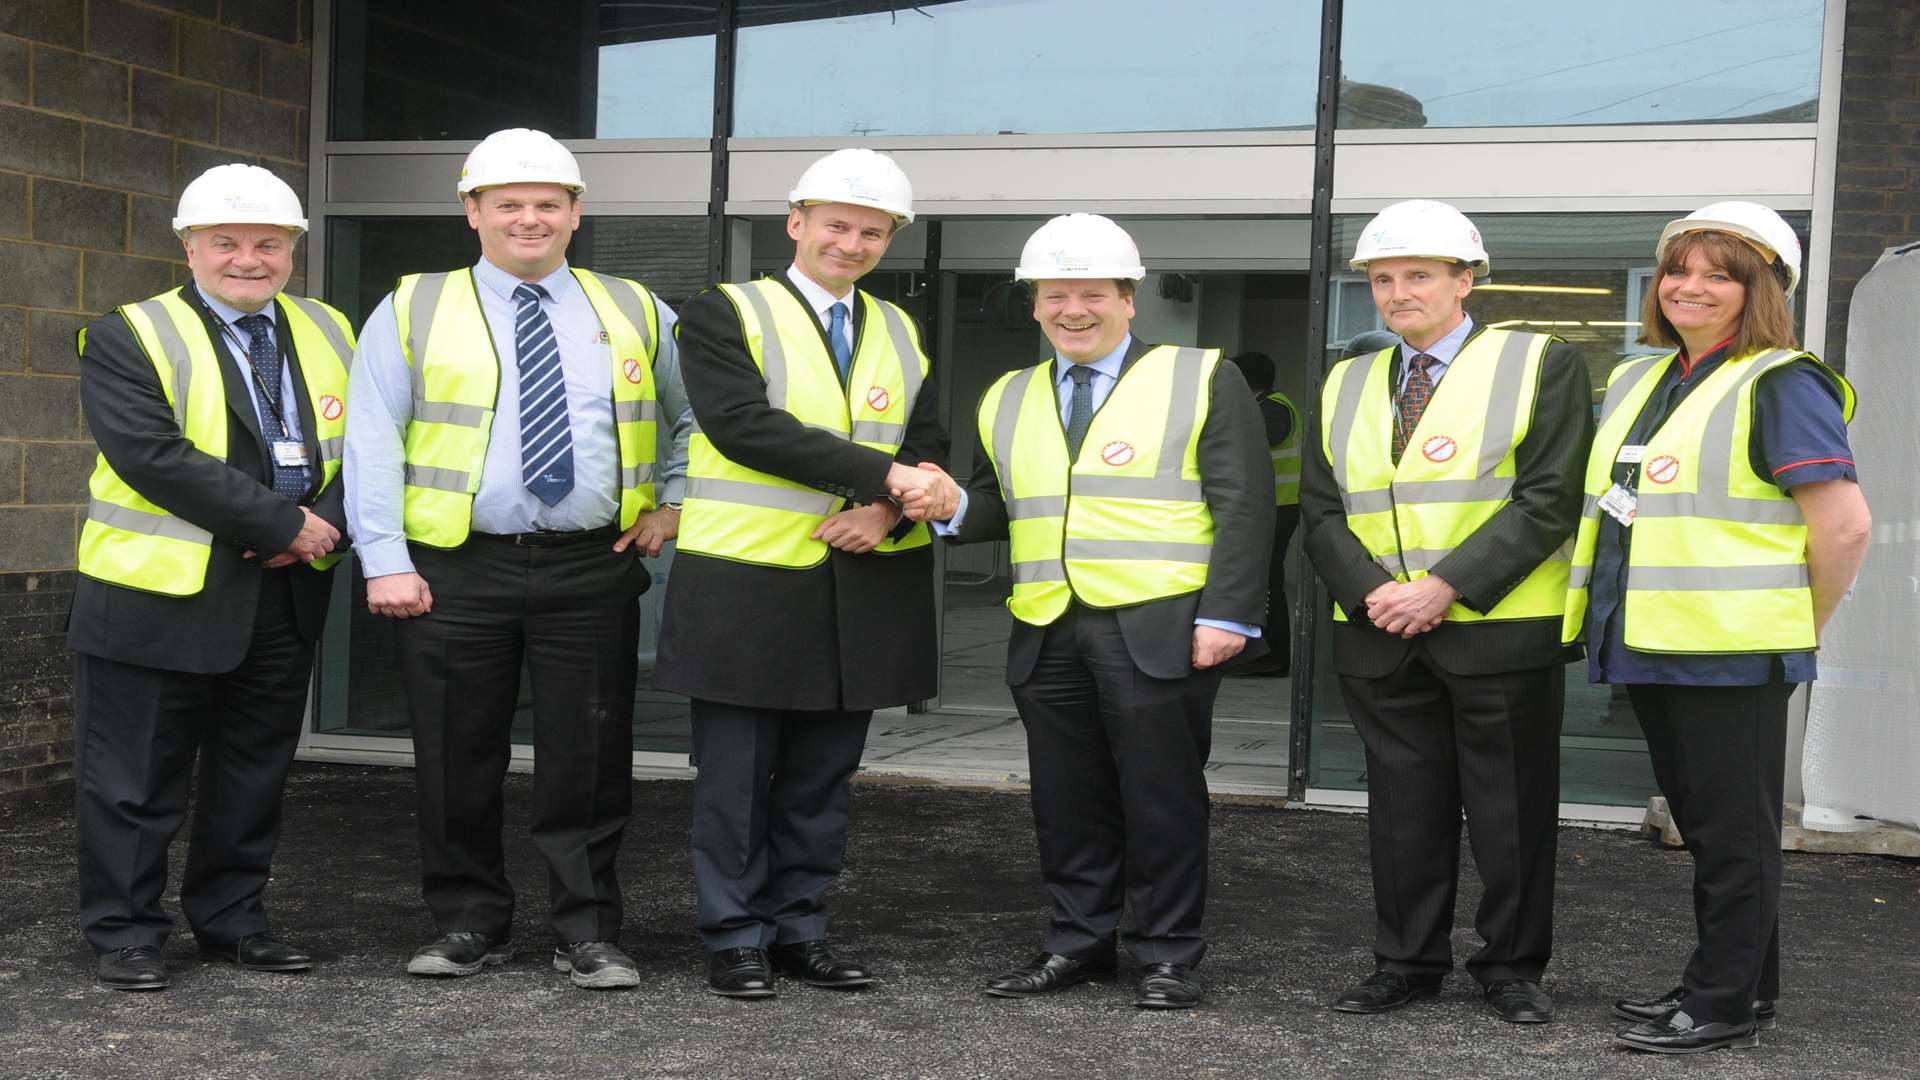 Health Secretary Jeremy Hunt (middle left) and MP Charlie Elphicke (middle right) were given a tour of the building